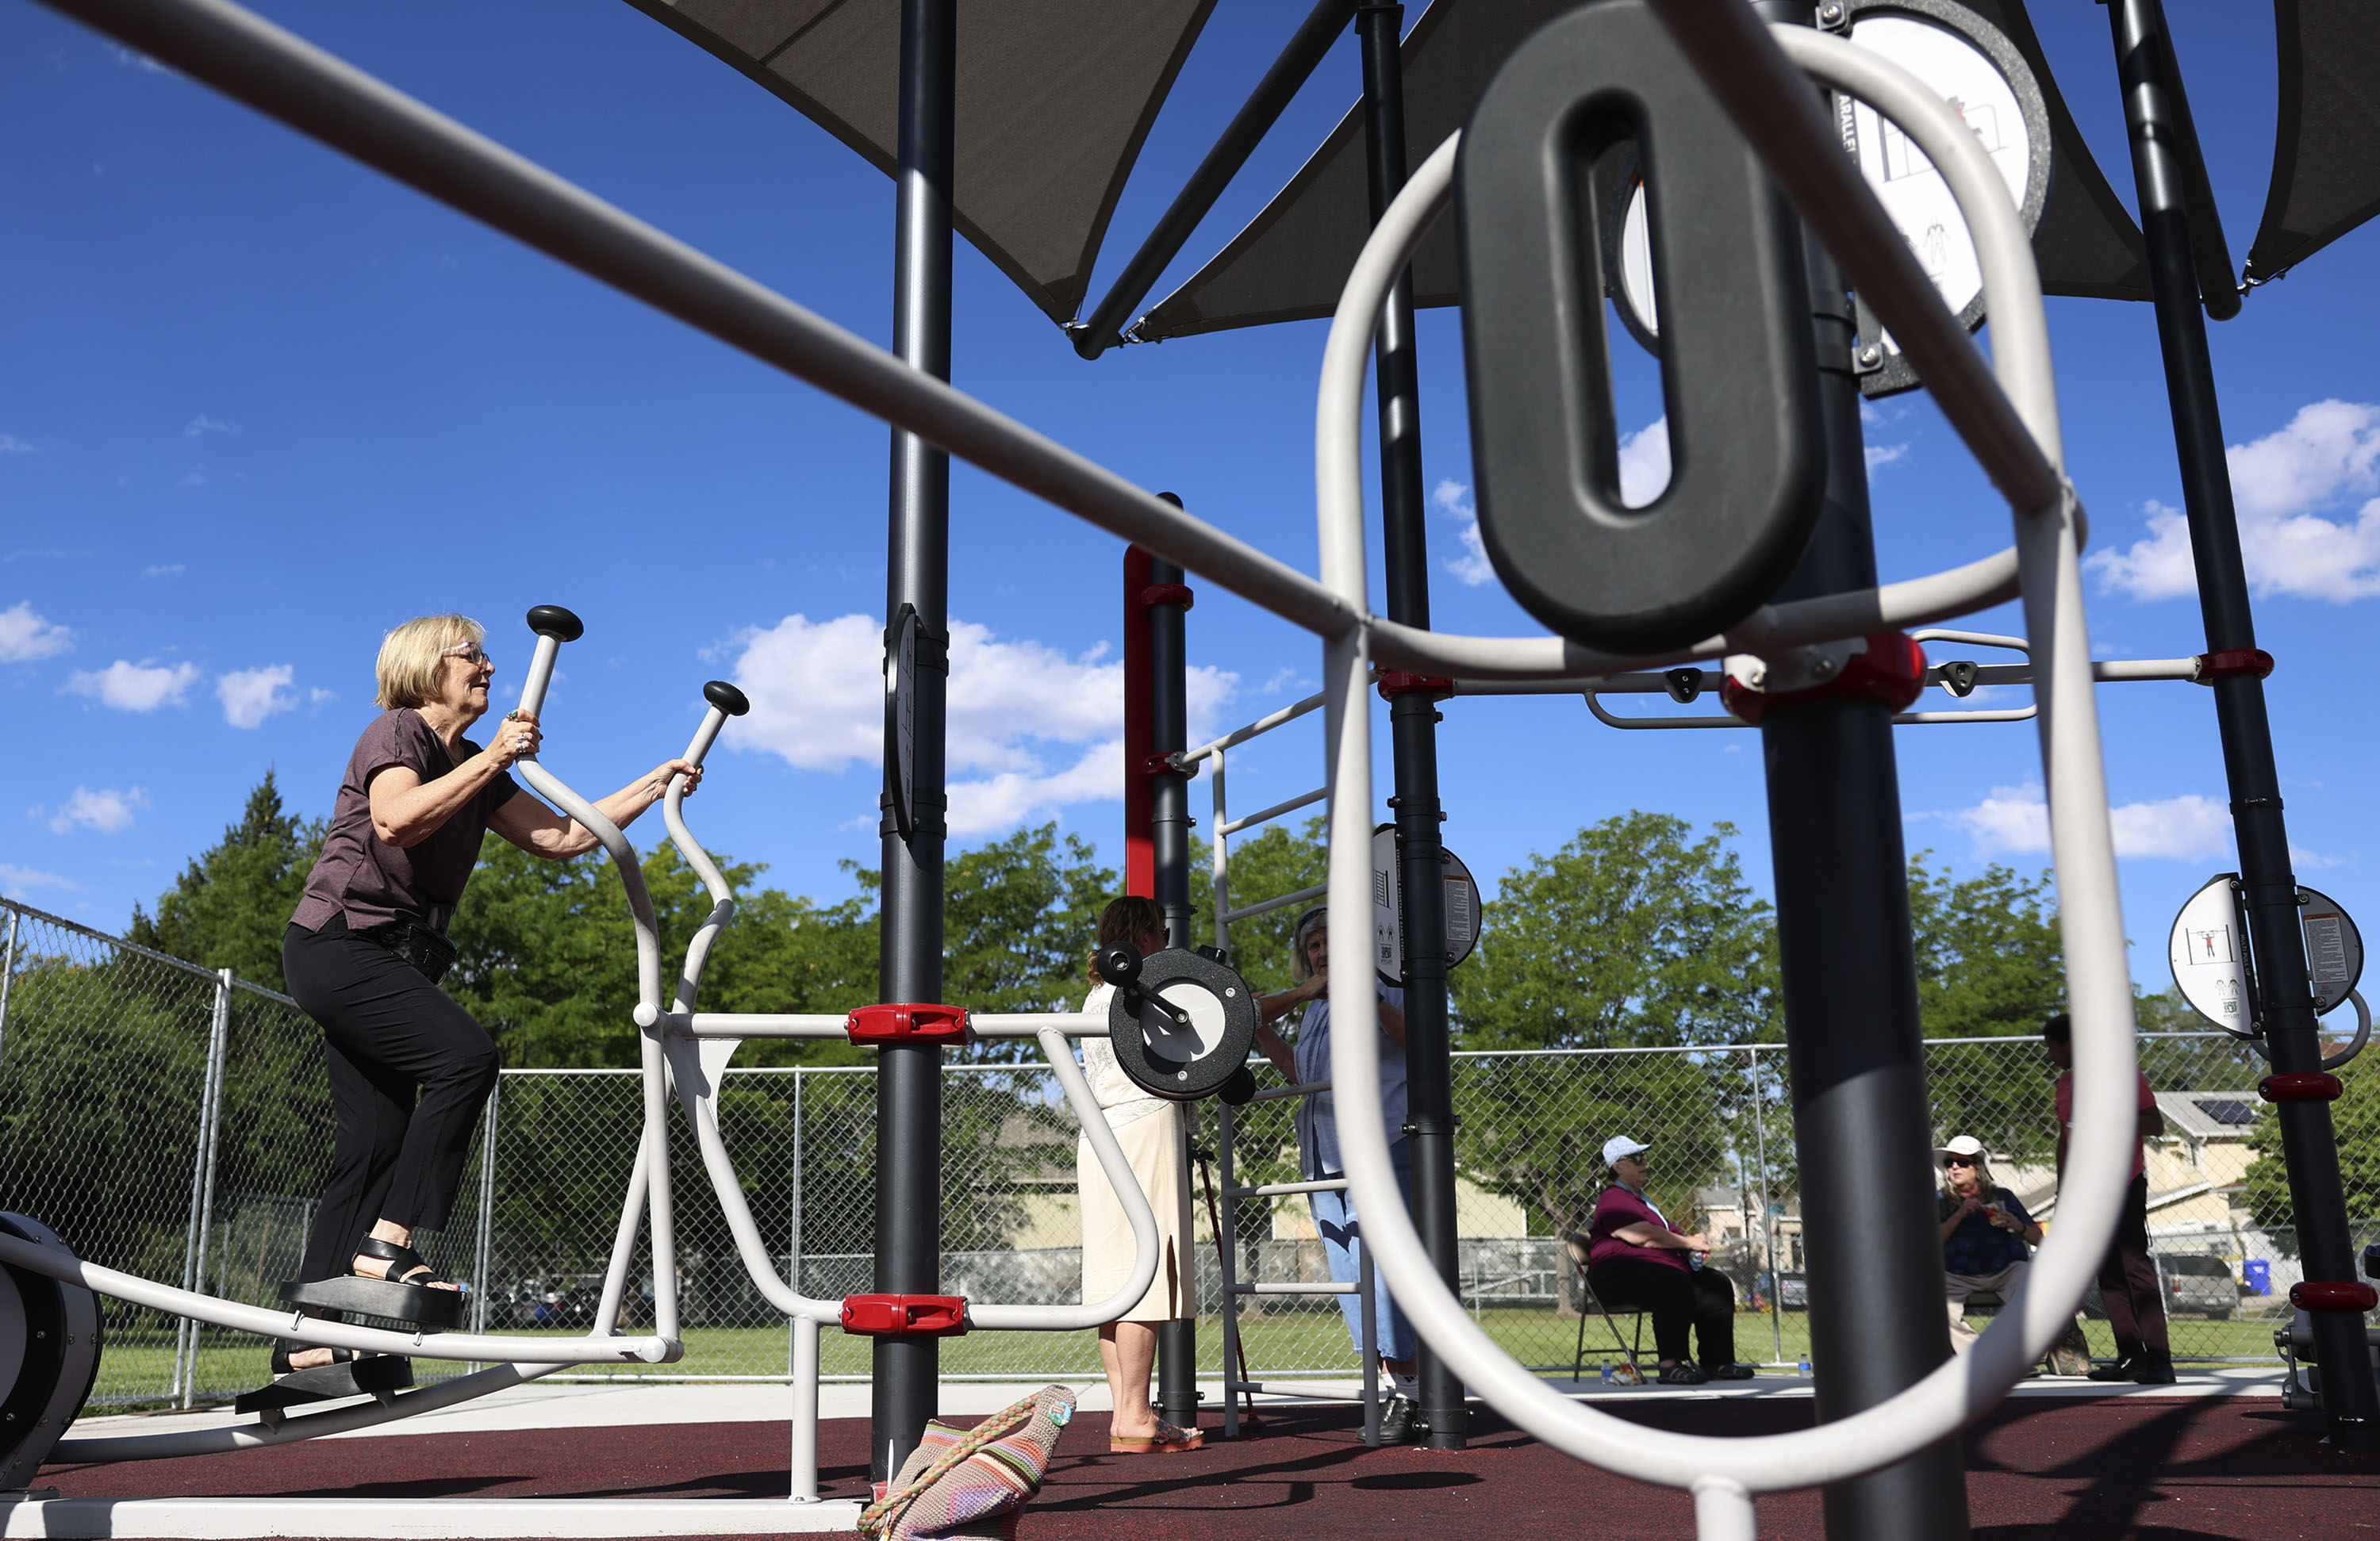 AARP outdoor fitness parks: How can you stay fit as an older adult? –  Deseret News